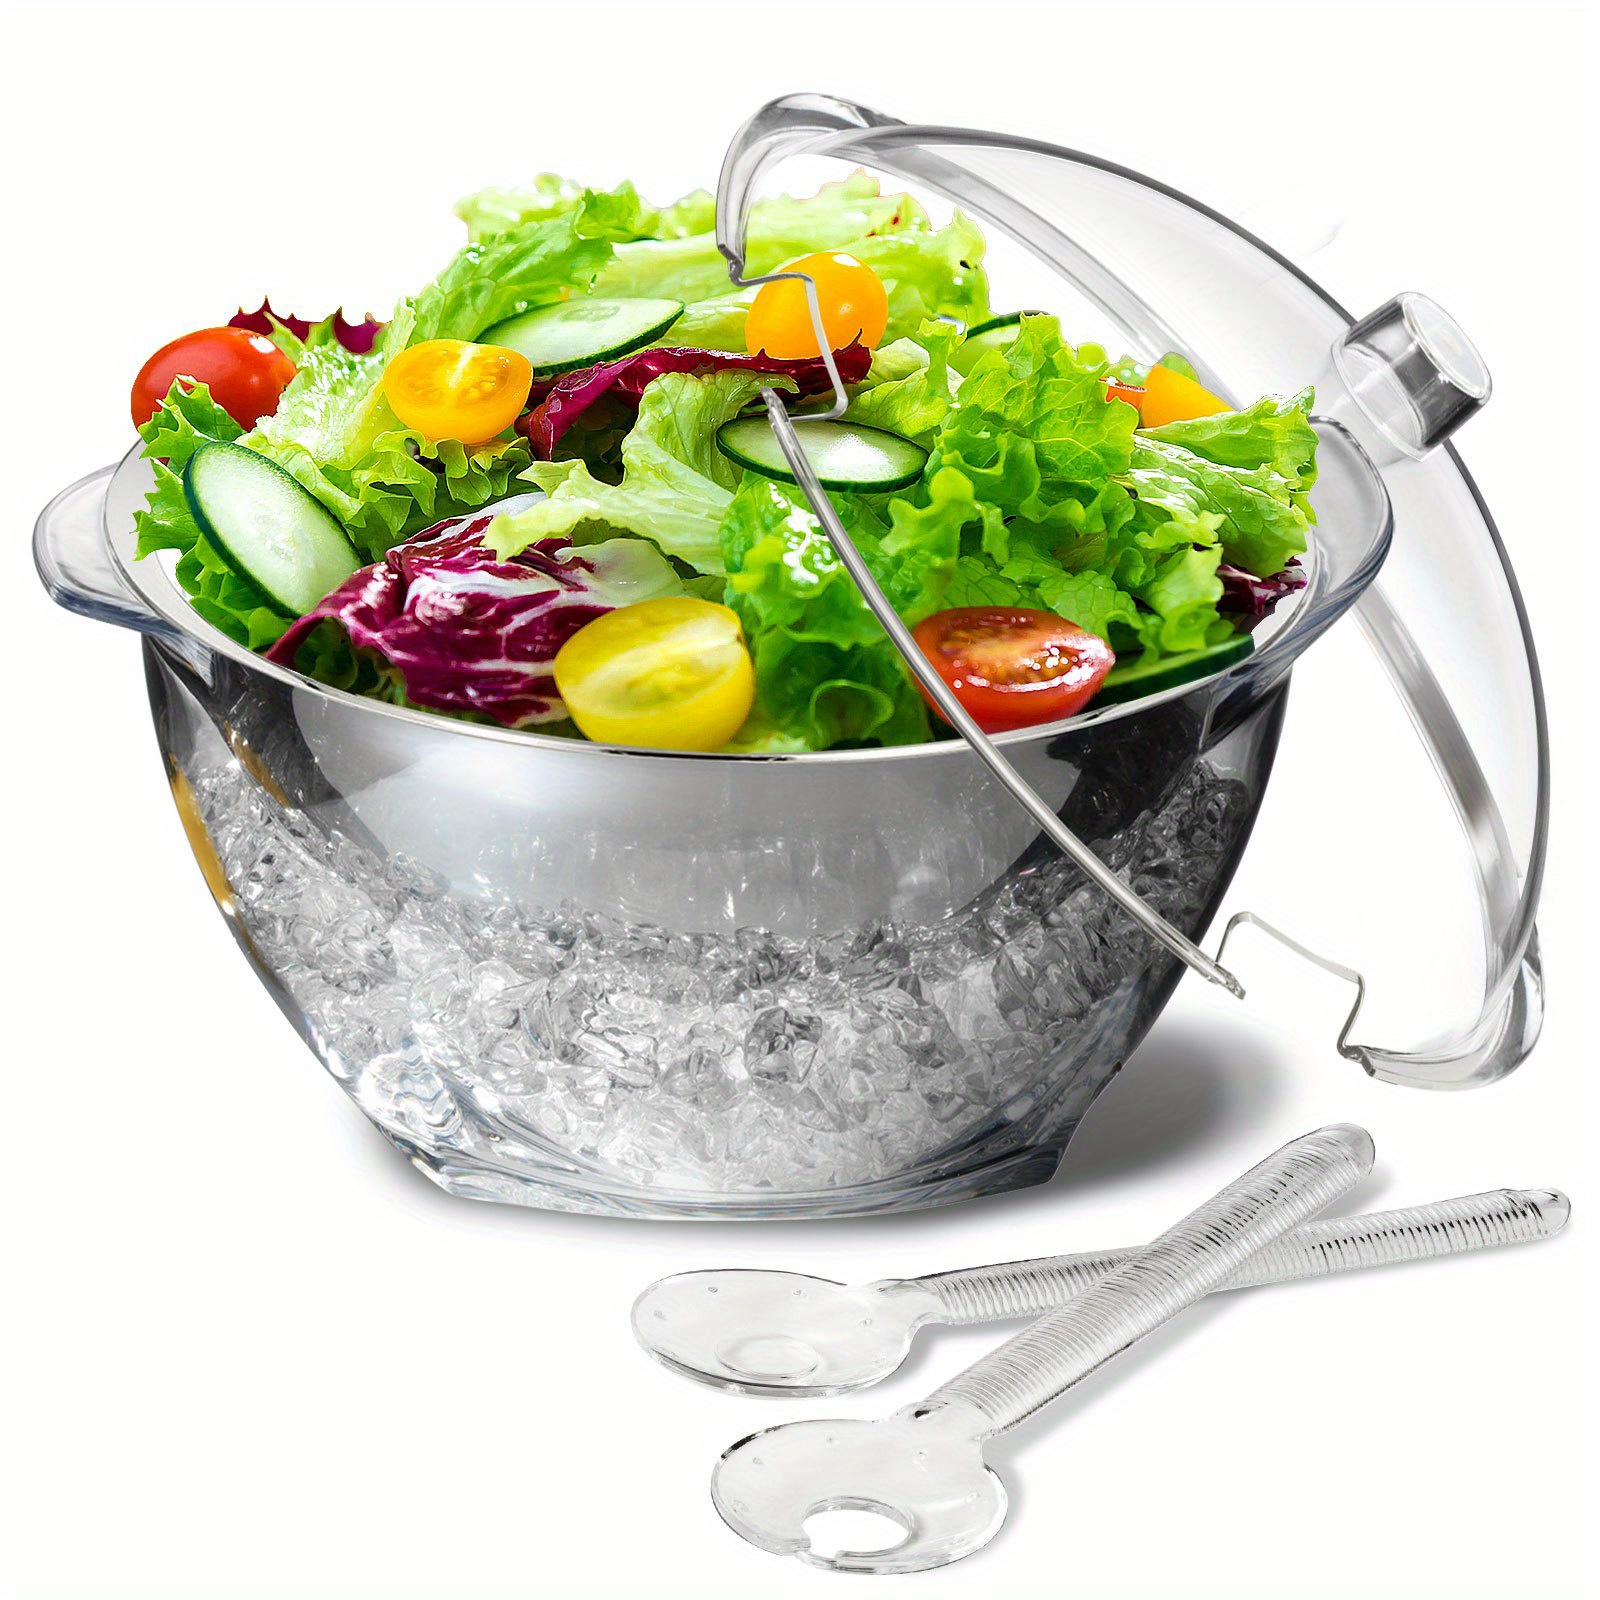 

1pc, Salad Bowl, 4.5 Qt Large Chilled Serving Bowl With Lid For Parties, Ice Bowls To Keep Veggie, Fruit, Potato, Pasta Cold, Kitchen Stuff, Kitchen Accessaries, Party Supplies